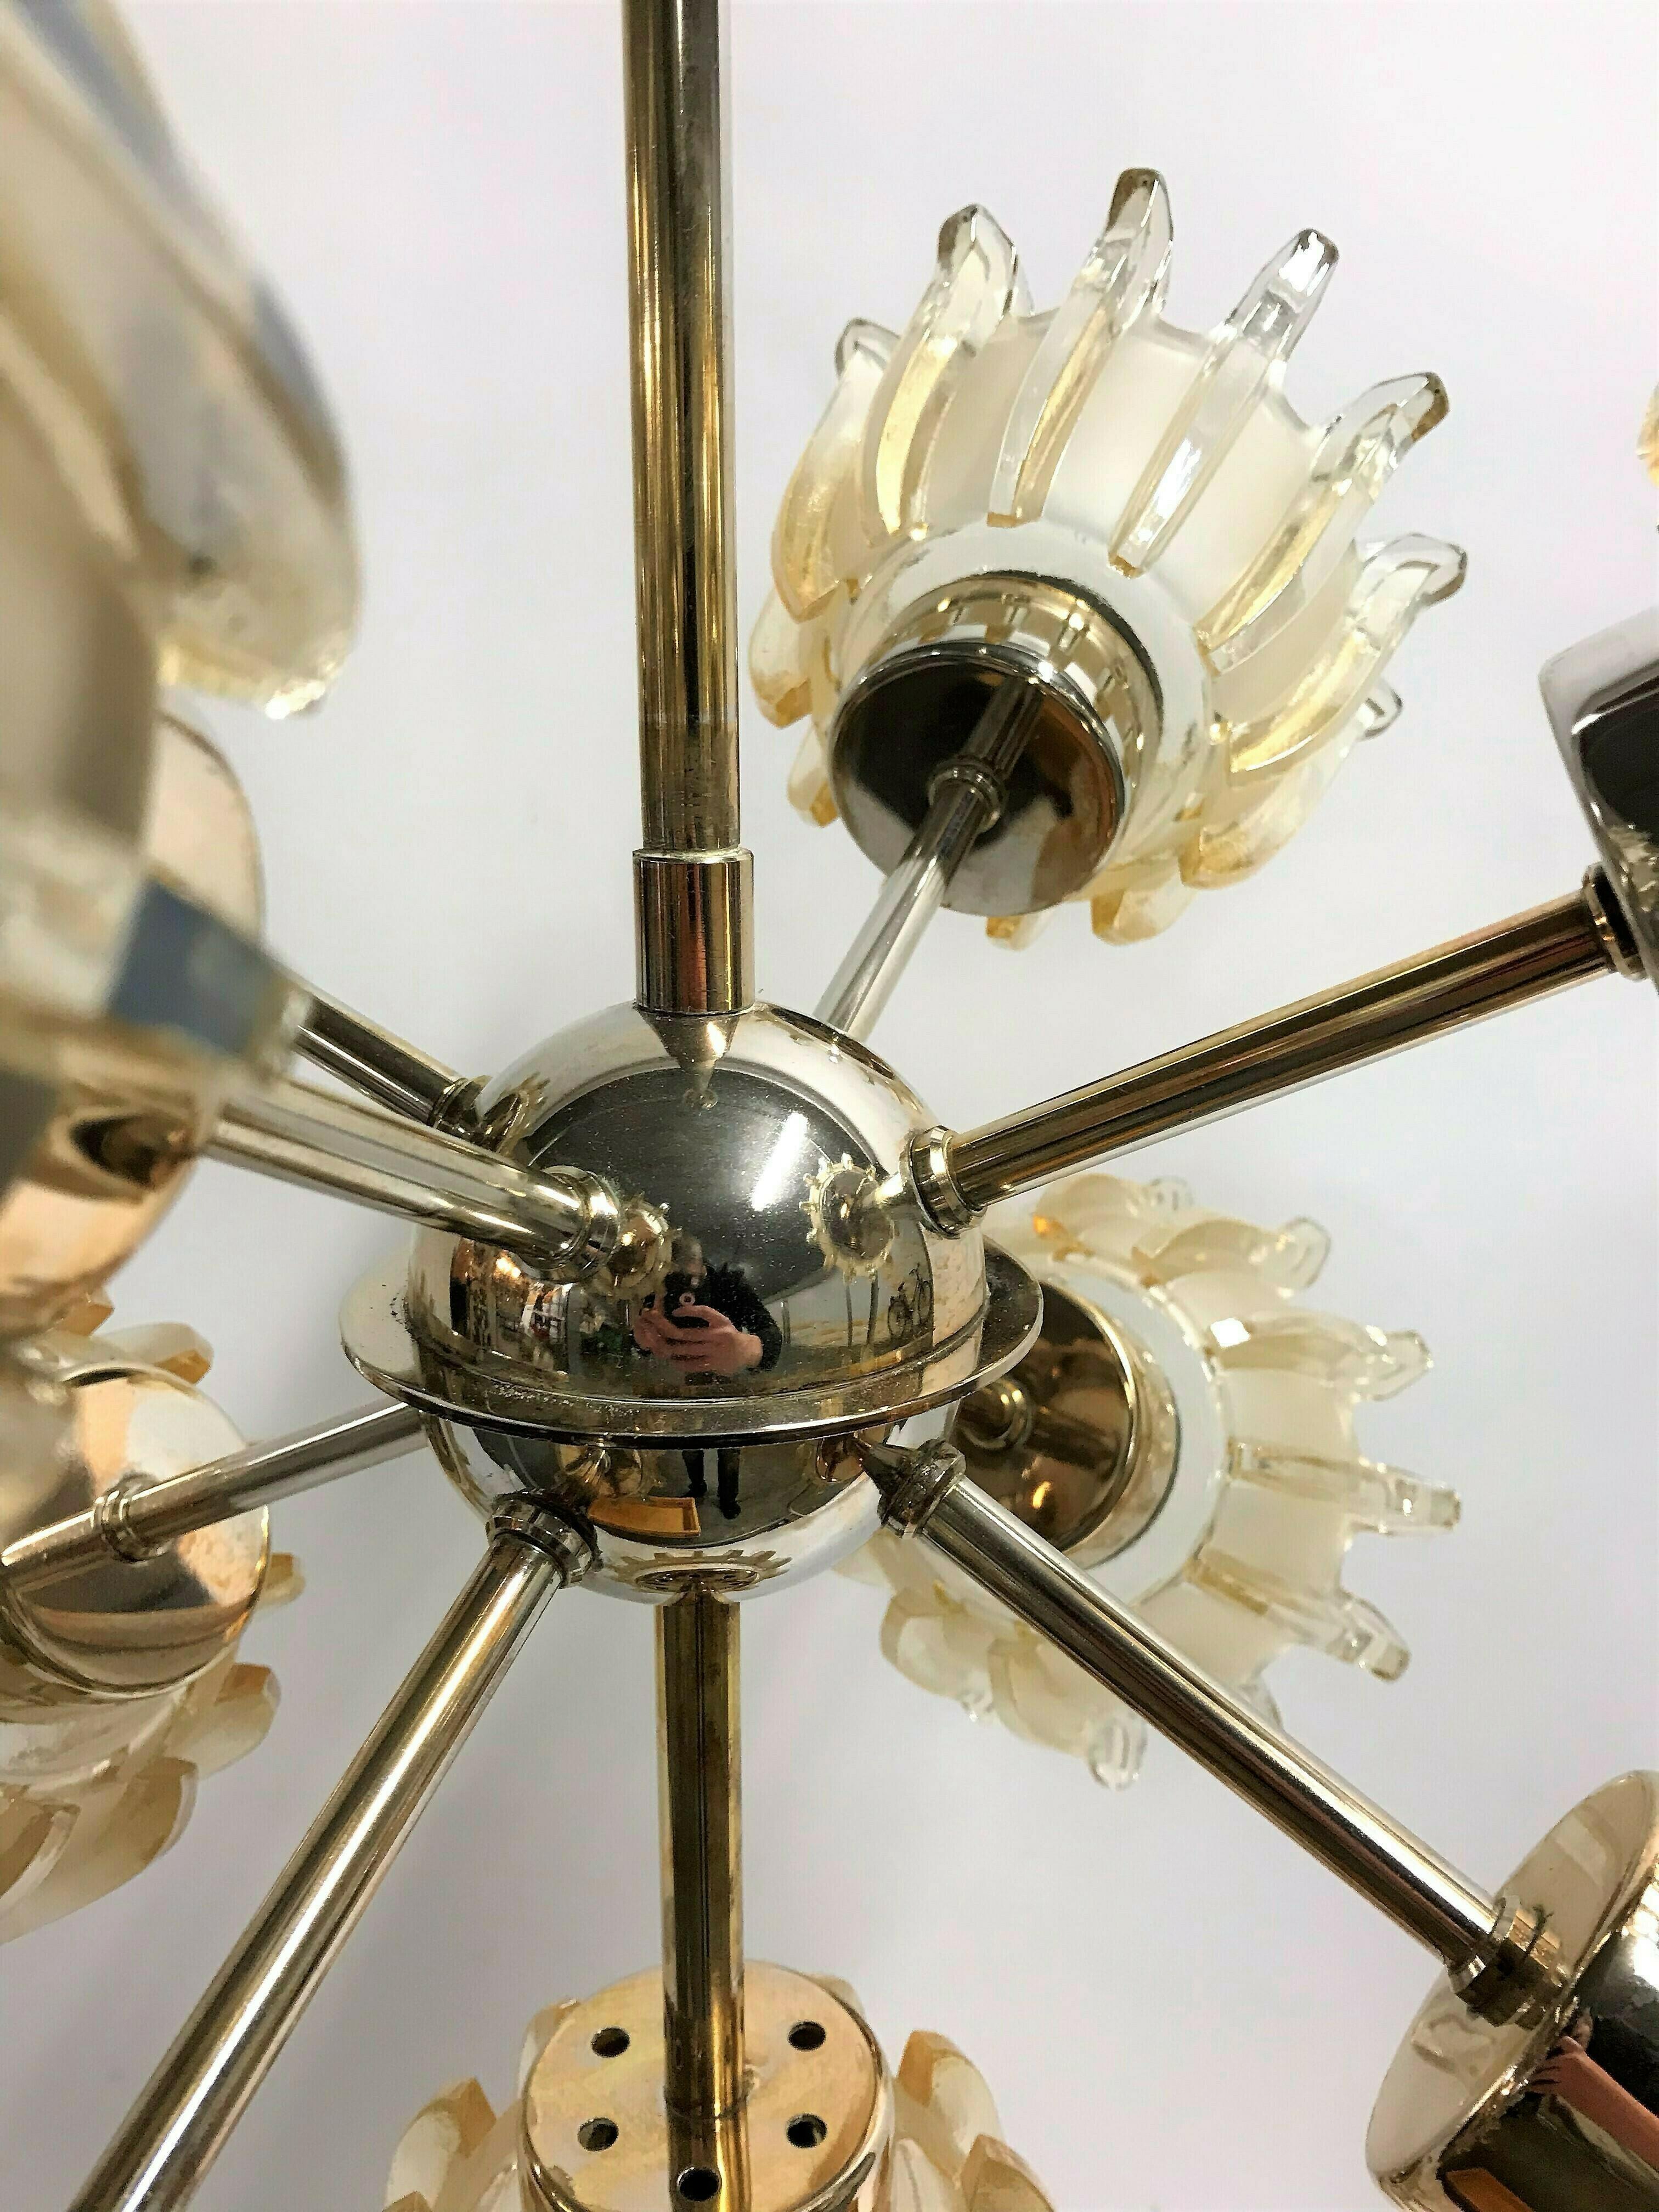 Wonderful brass tulip glass chandelier design by Doria Leuchten.

The Sputnik design was popular during the 1960s.

Subtitle size, suitable for smaller rooms.

The chandelier has nine light points.

Good condition, made from brass and frosted